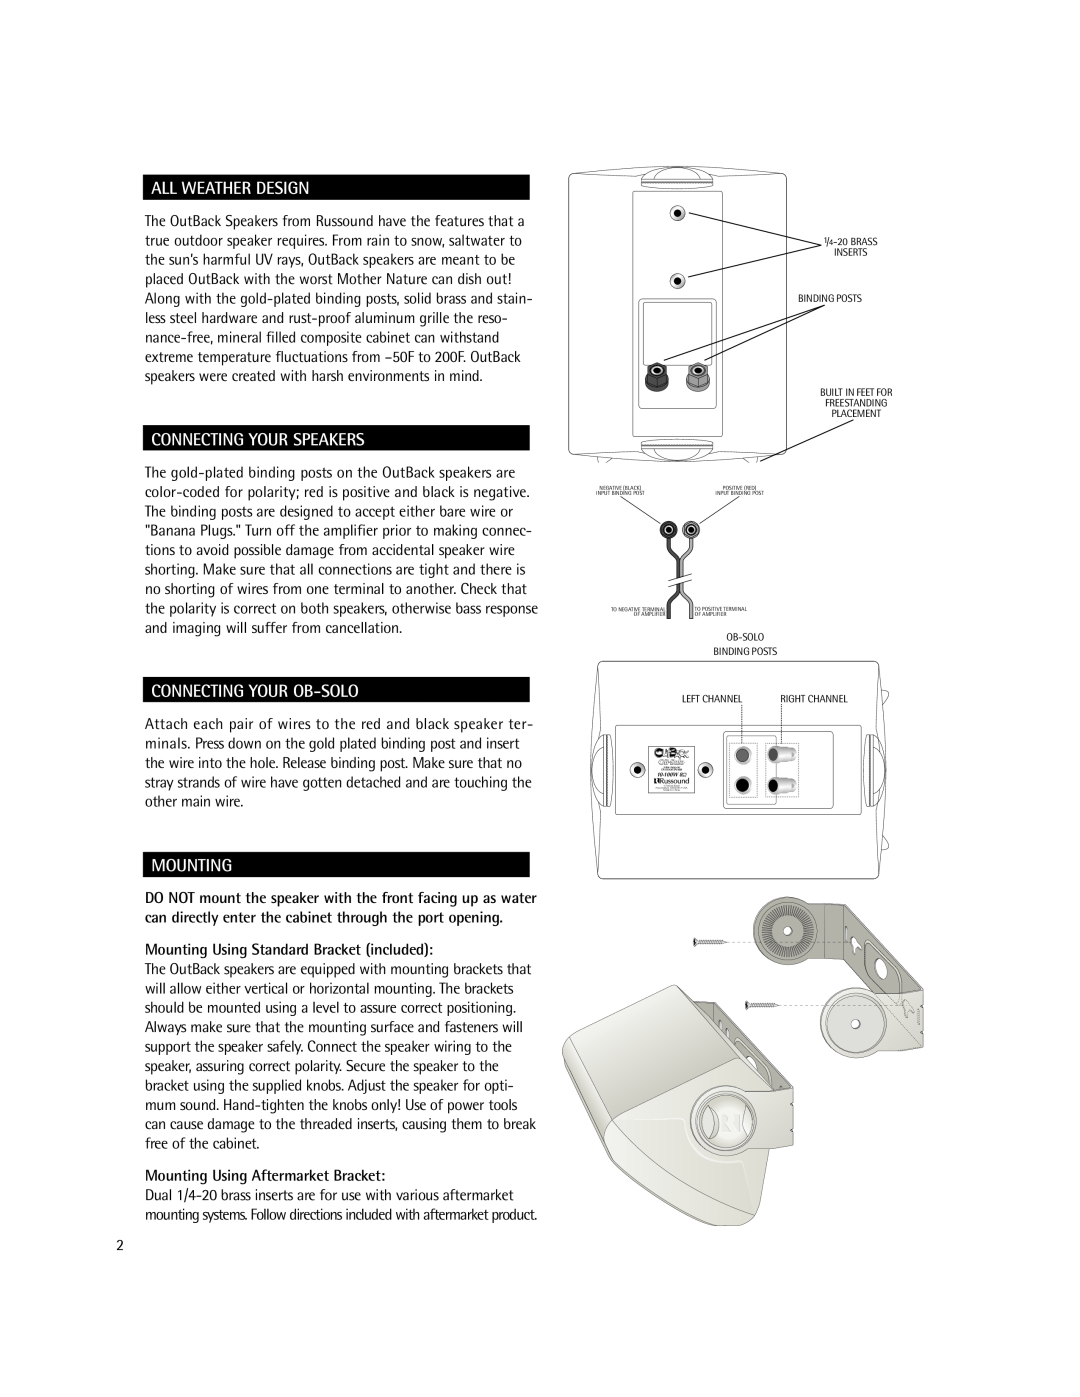 Russound instruction manual All Weather Design, Connecting Your Speakers, Connecting Your Ob-Solo, Mounting 